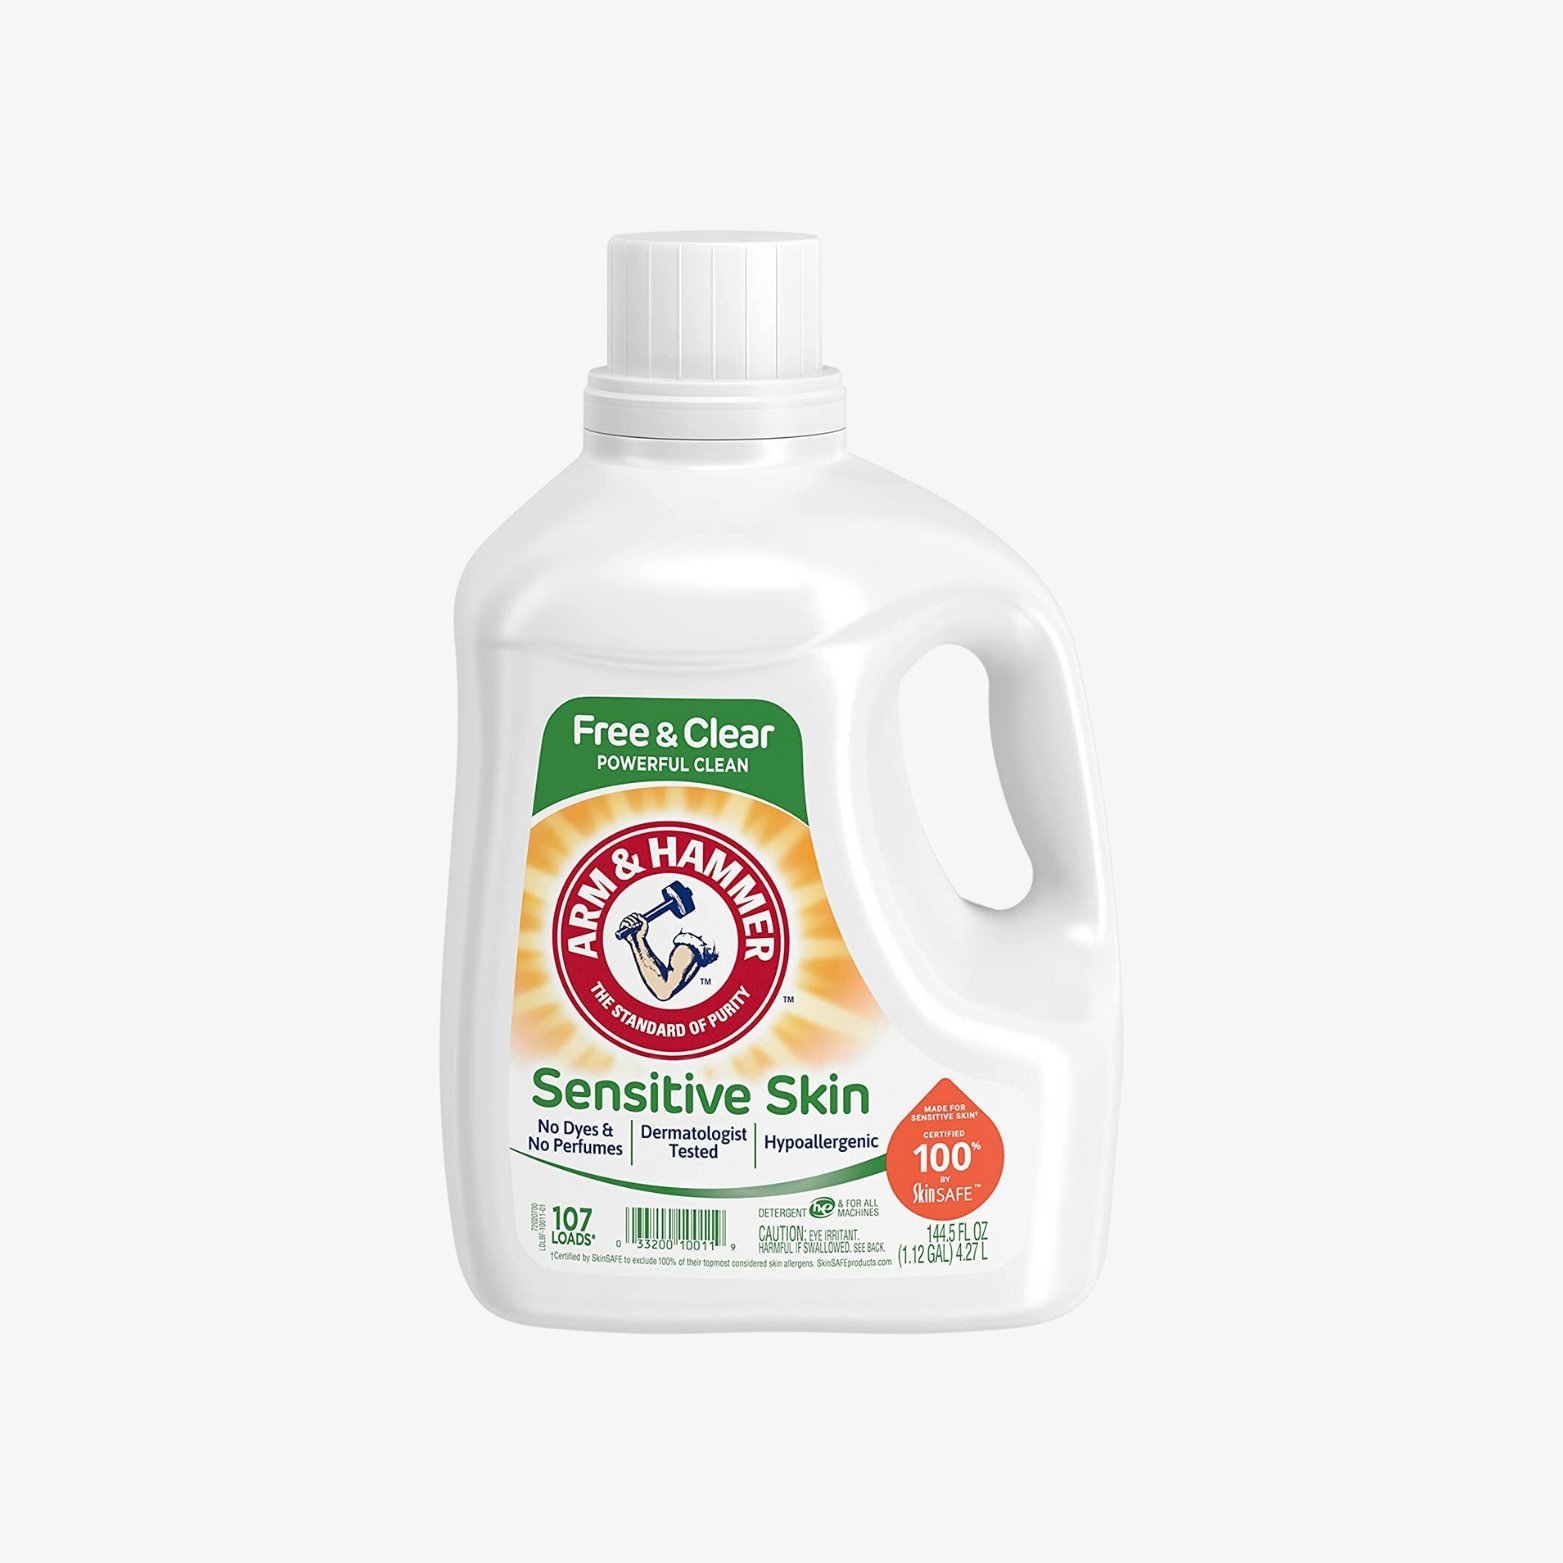 Arm & Hammer Free & Clear Laundry Detergent.jpg